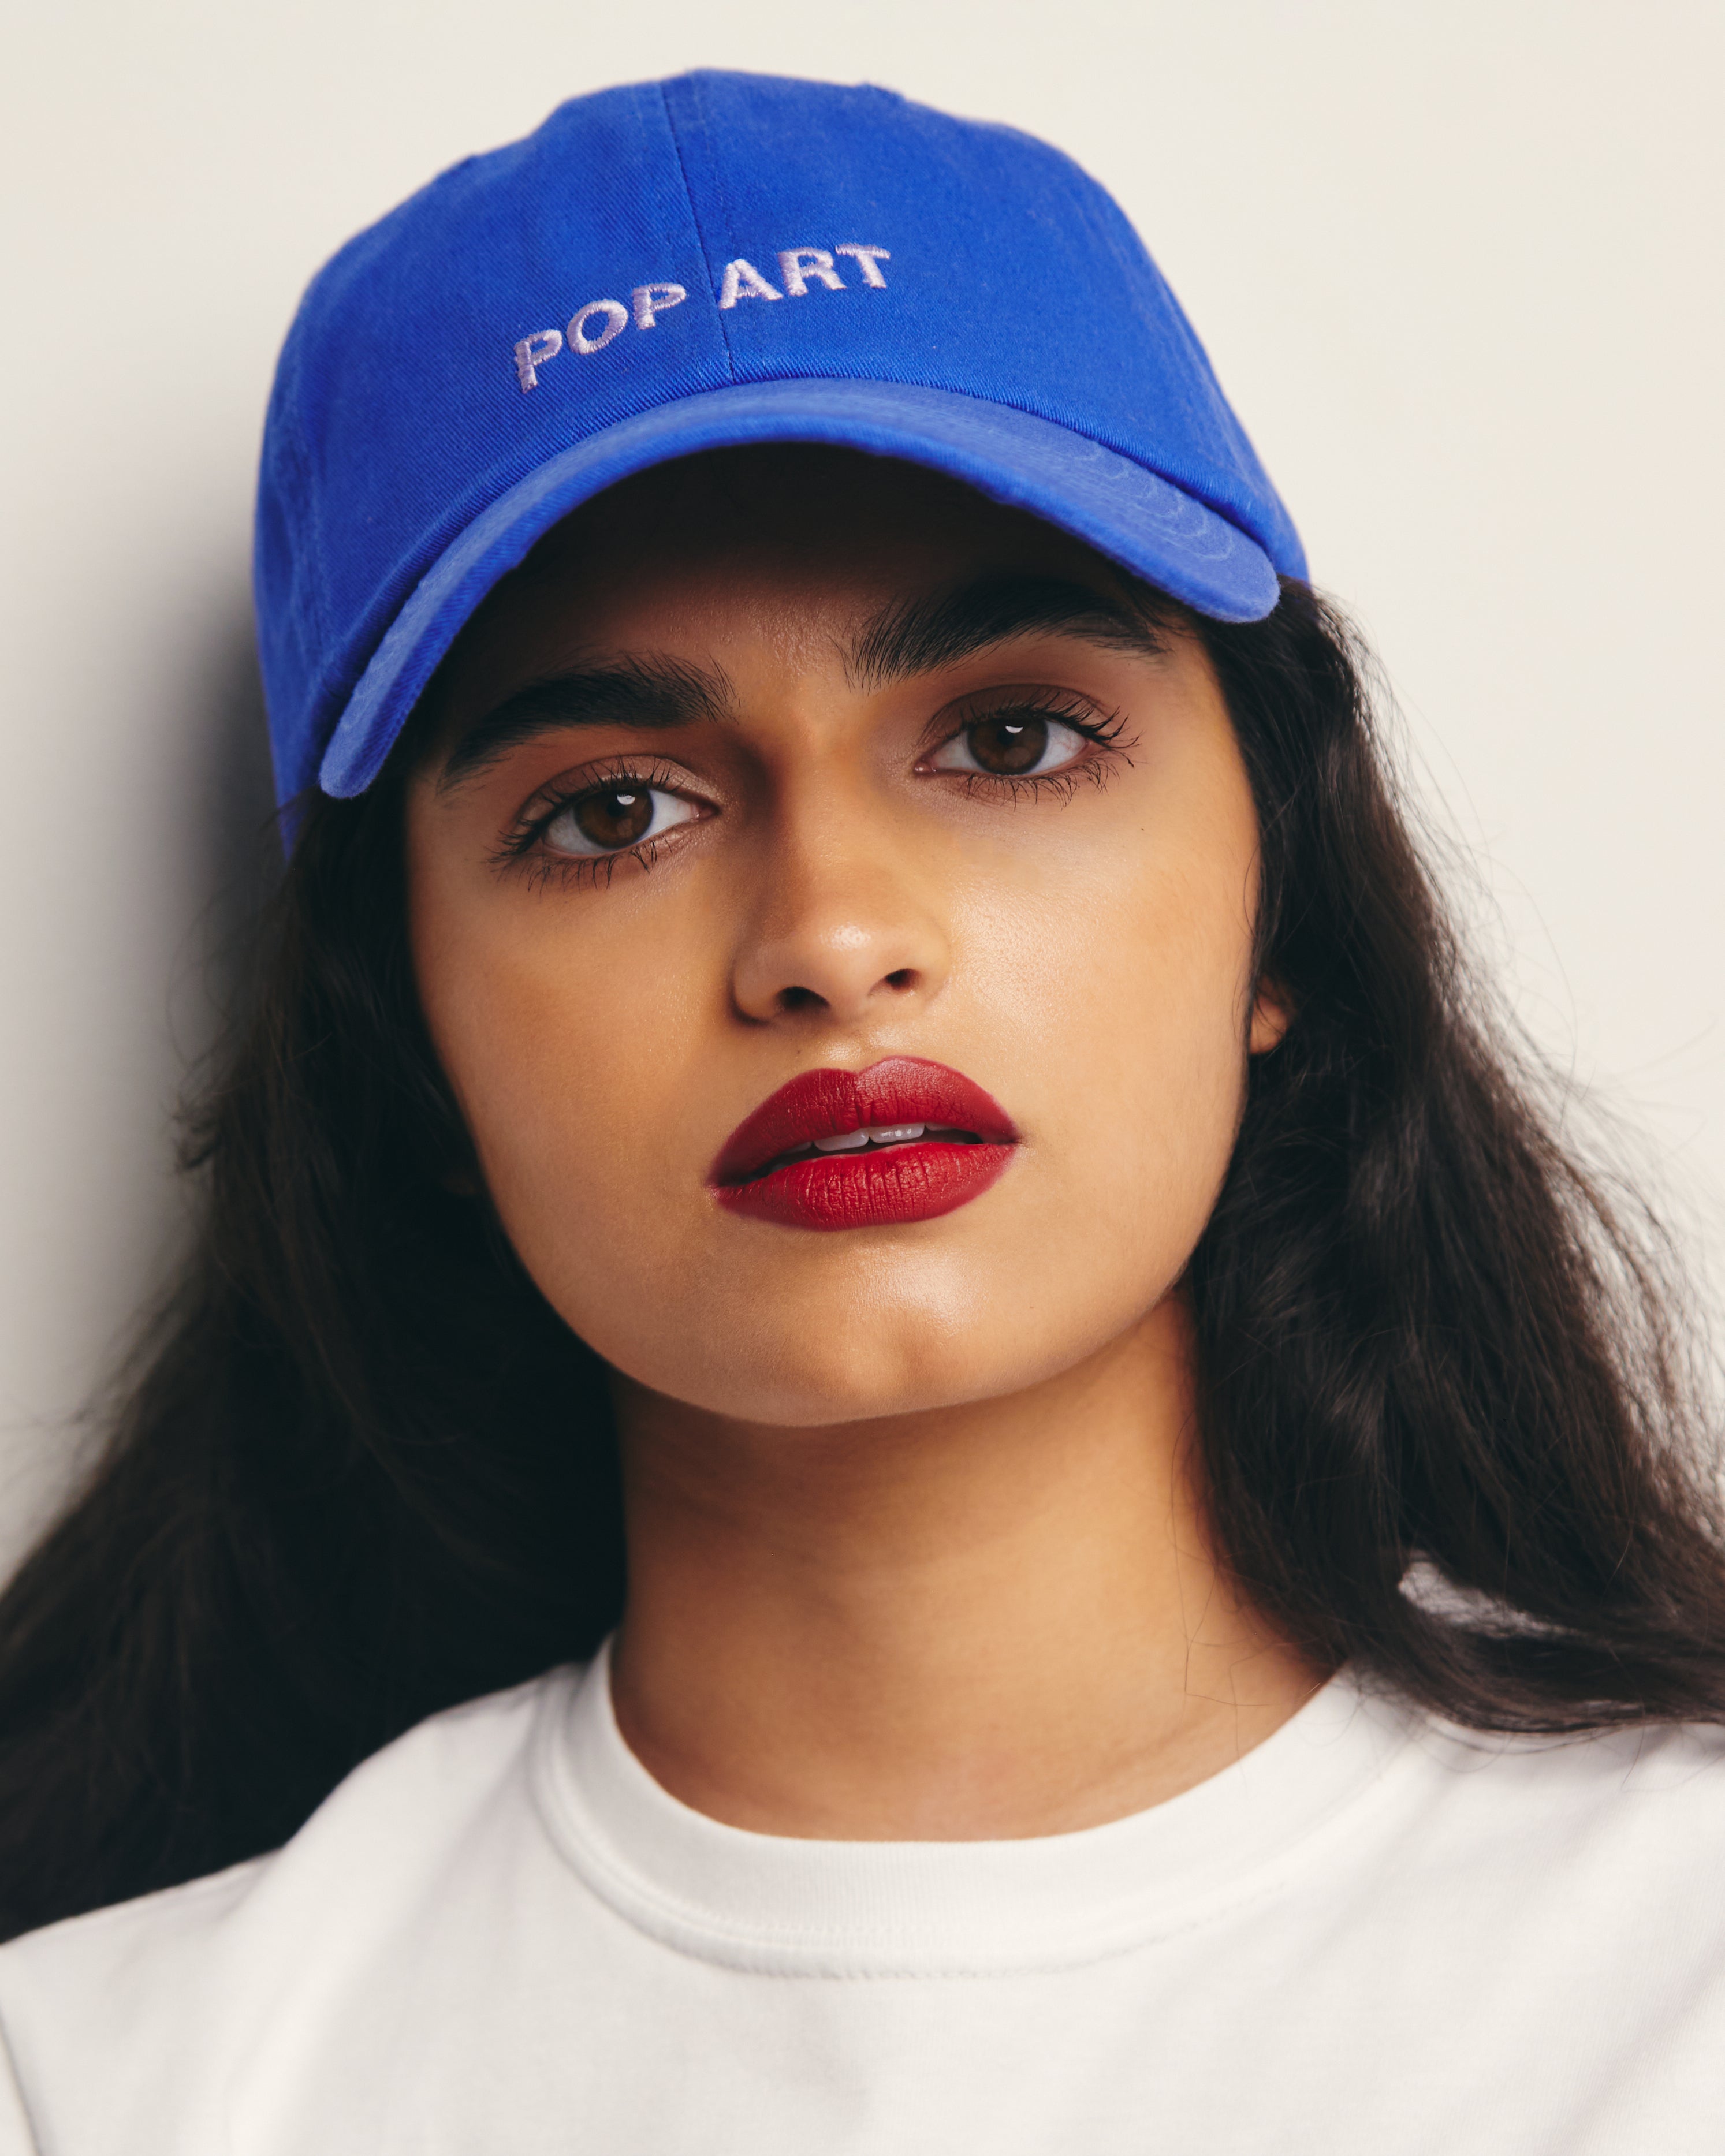 Mira Bhat wears 100% Cotton Royal Blue Dad Hat with Lavender Embroidery Pop Art Movement Text by Outsider Supply